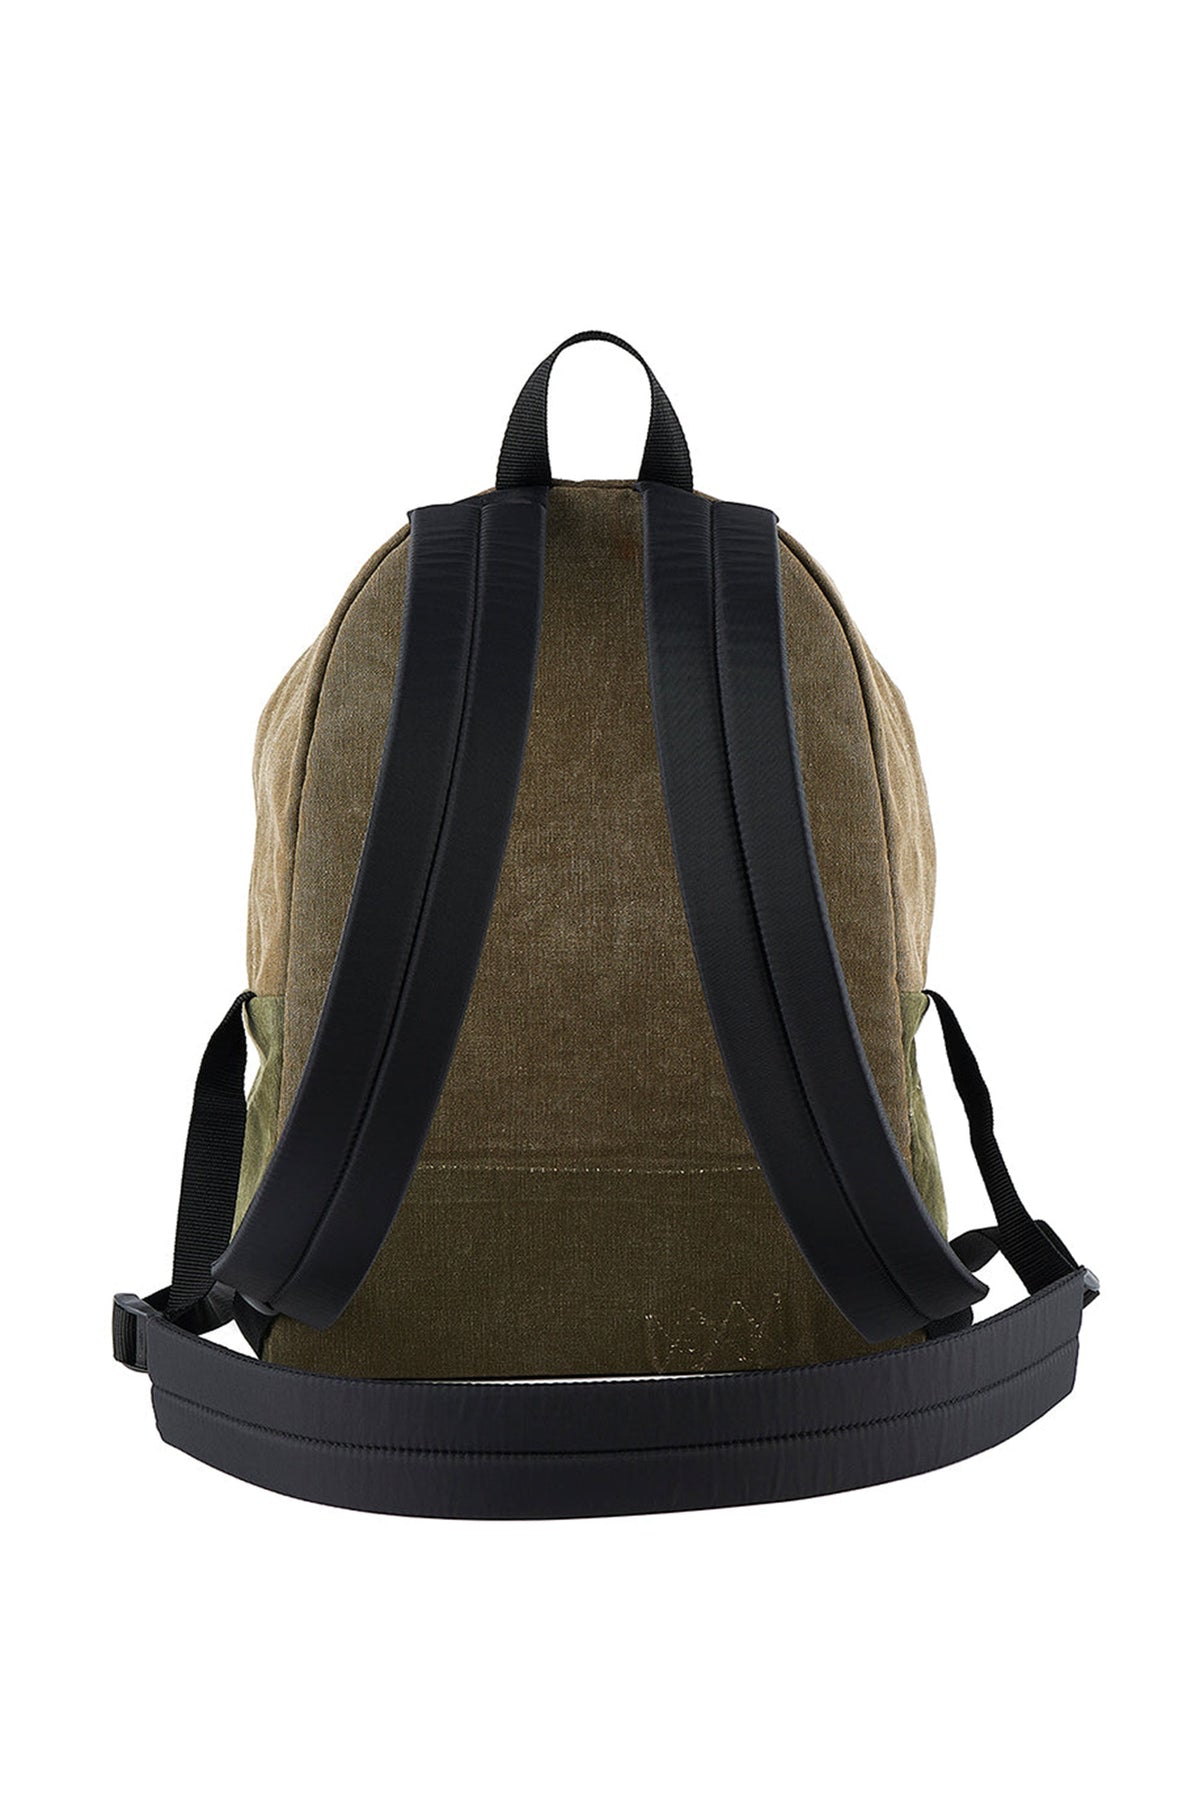 READYMADE BACK PACK / GRN